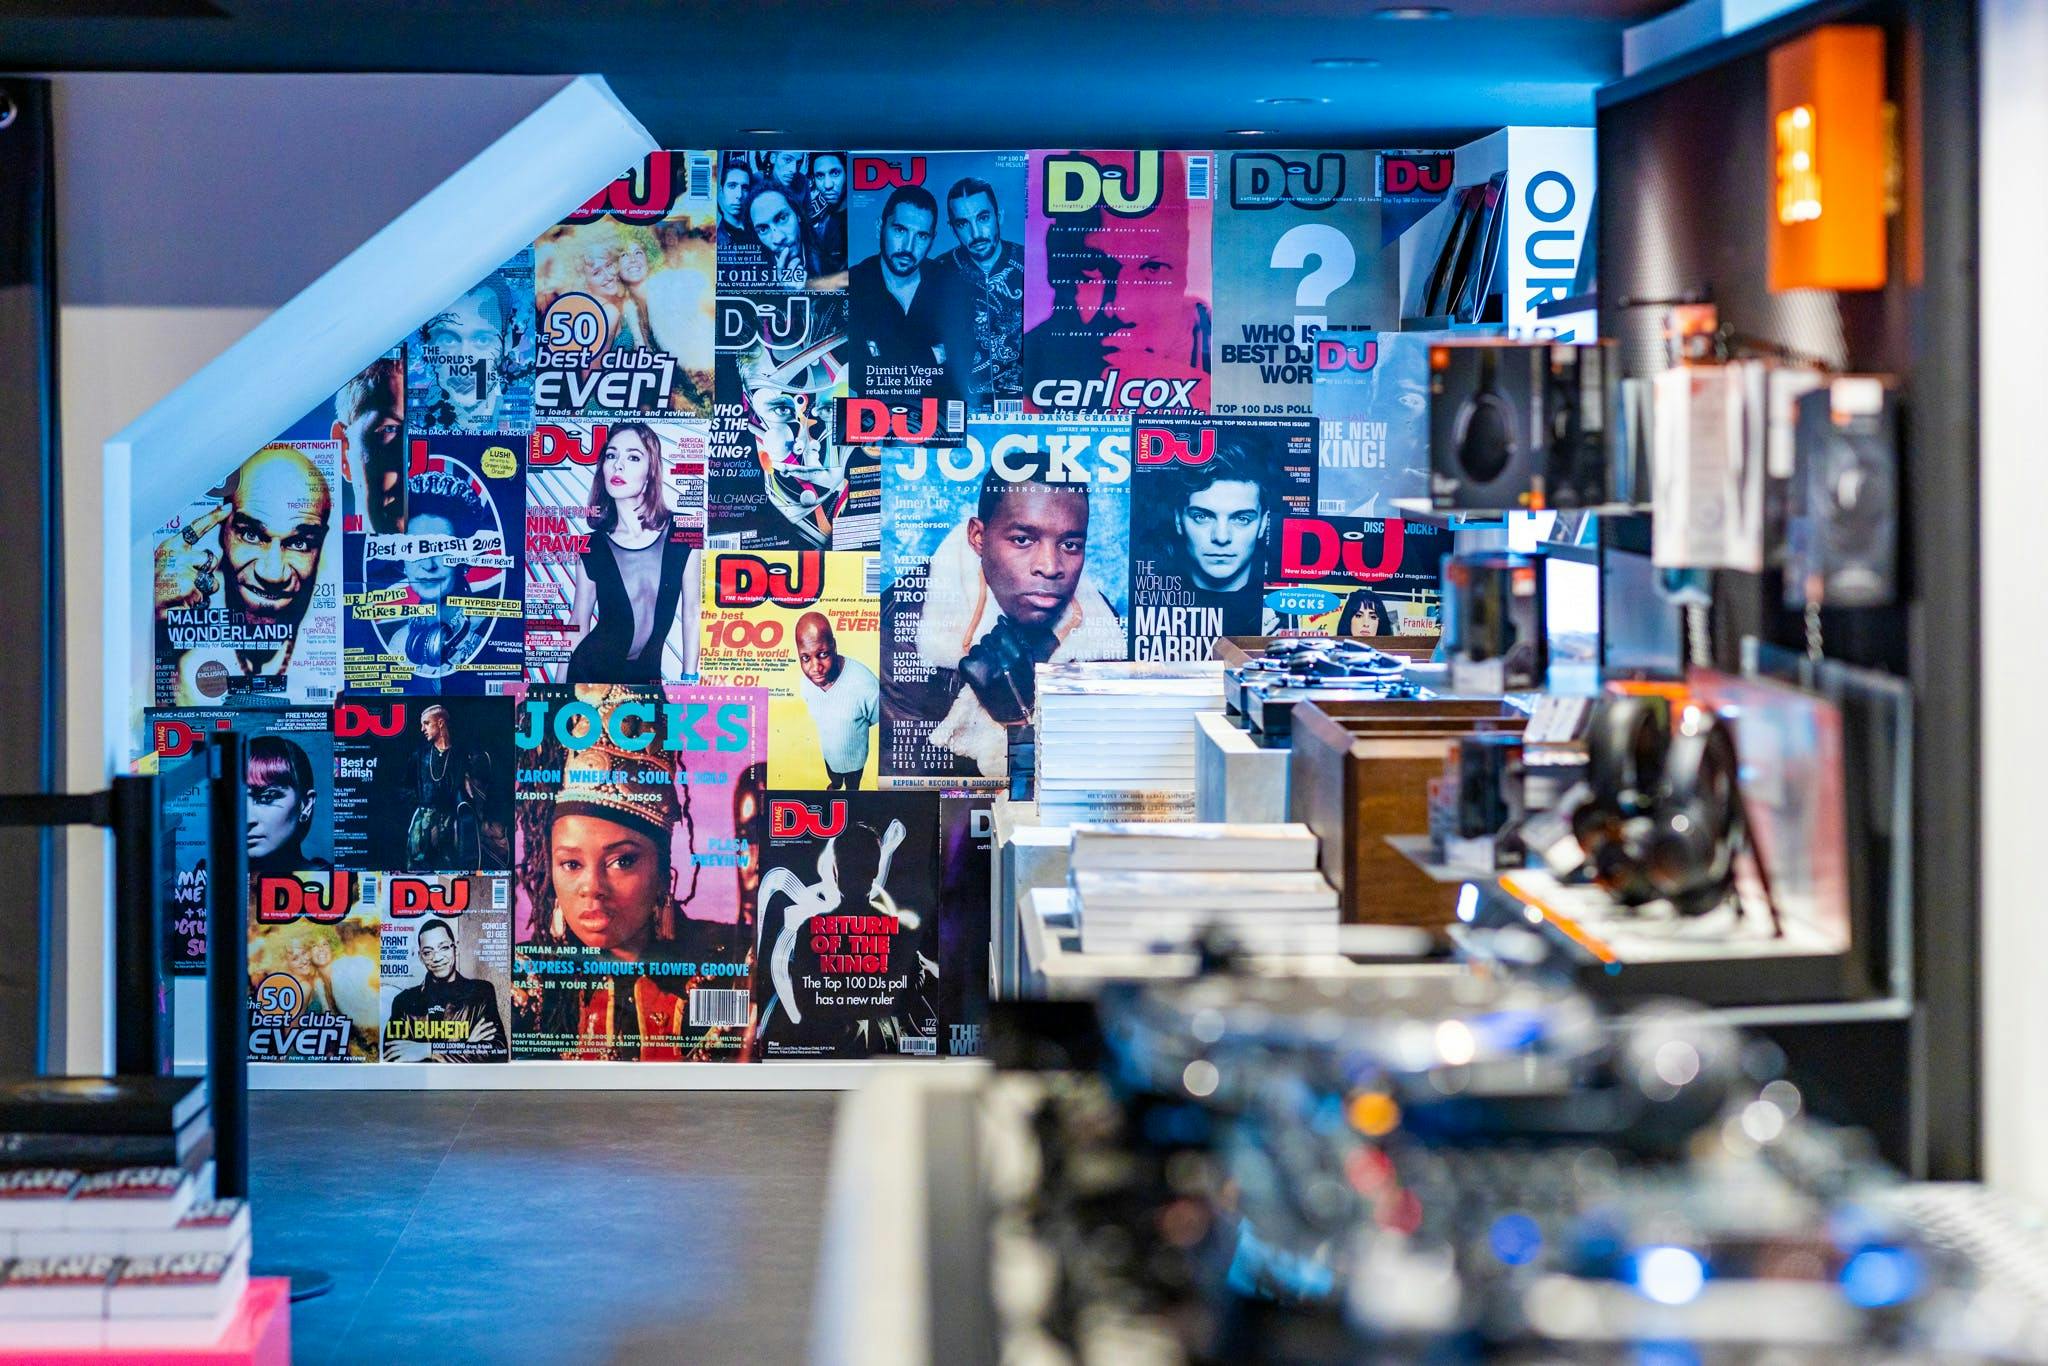 concept store with electronic music vinyl, dj gear books